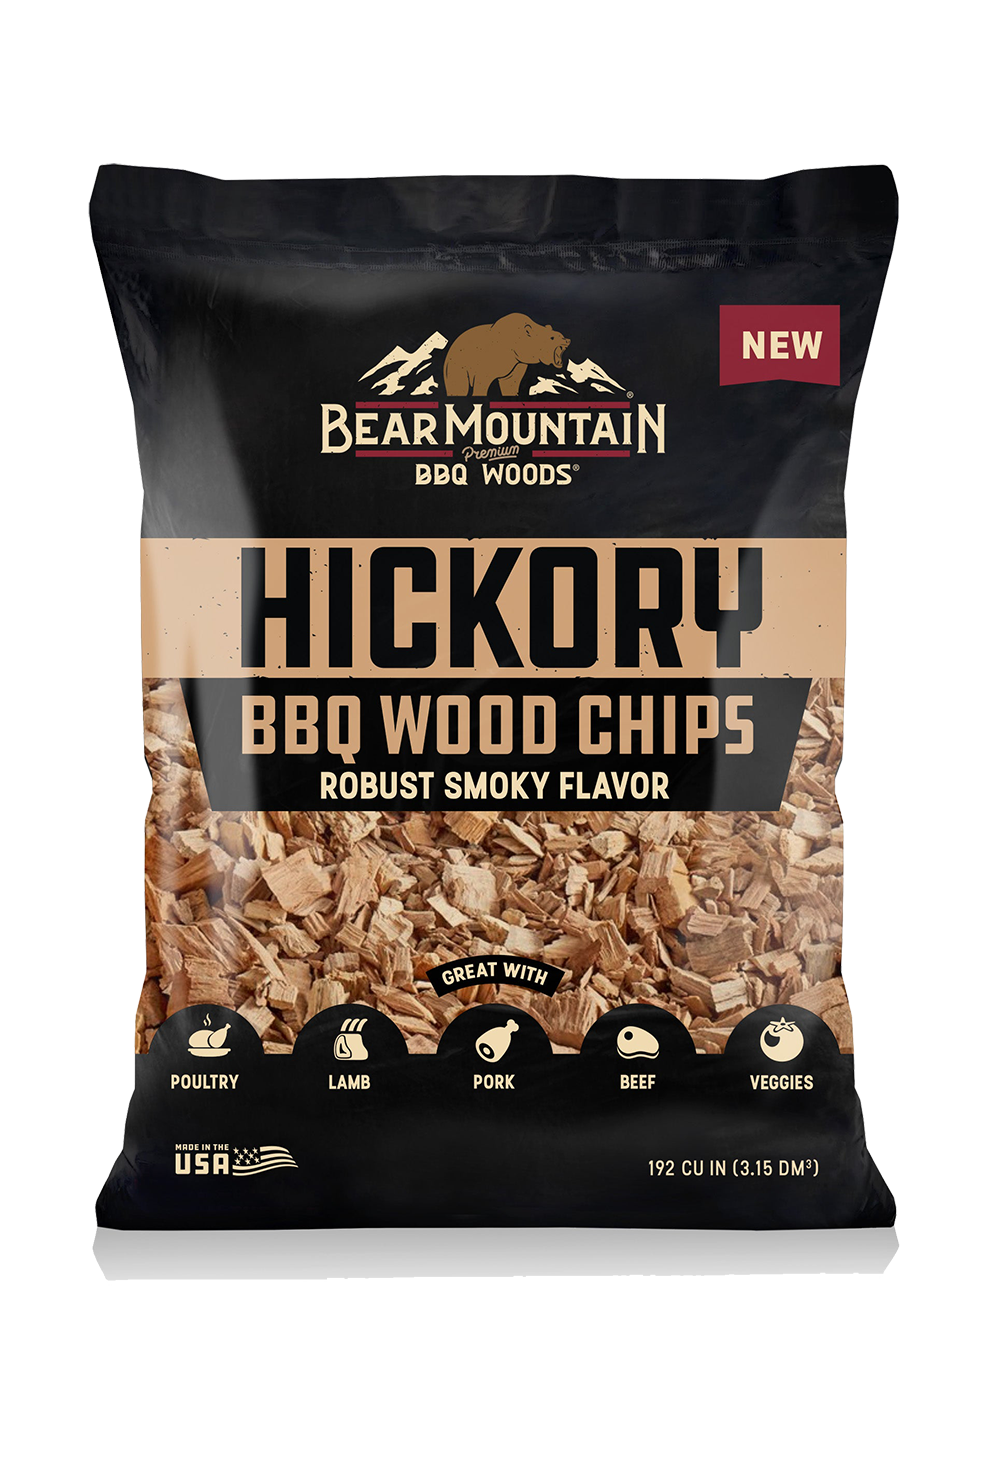 Hickory BBQ Wood Chips